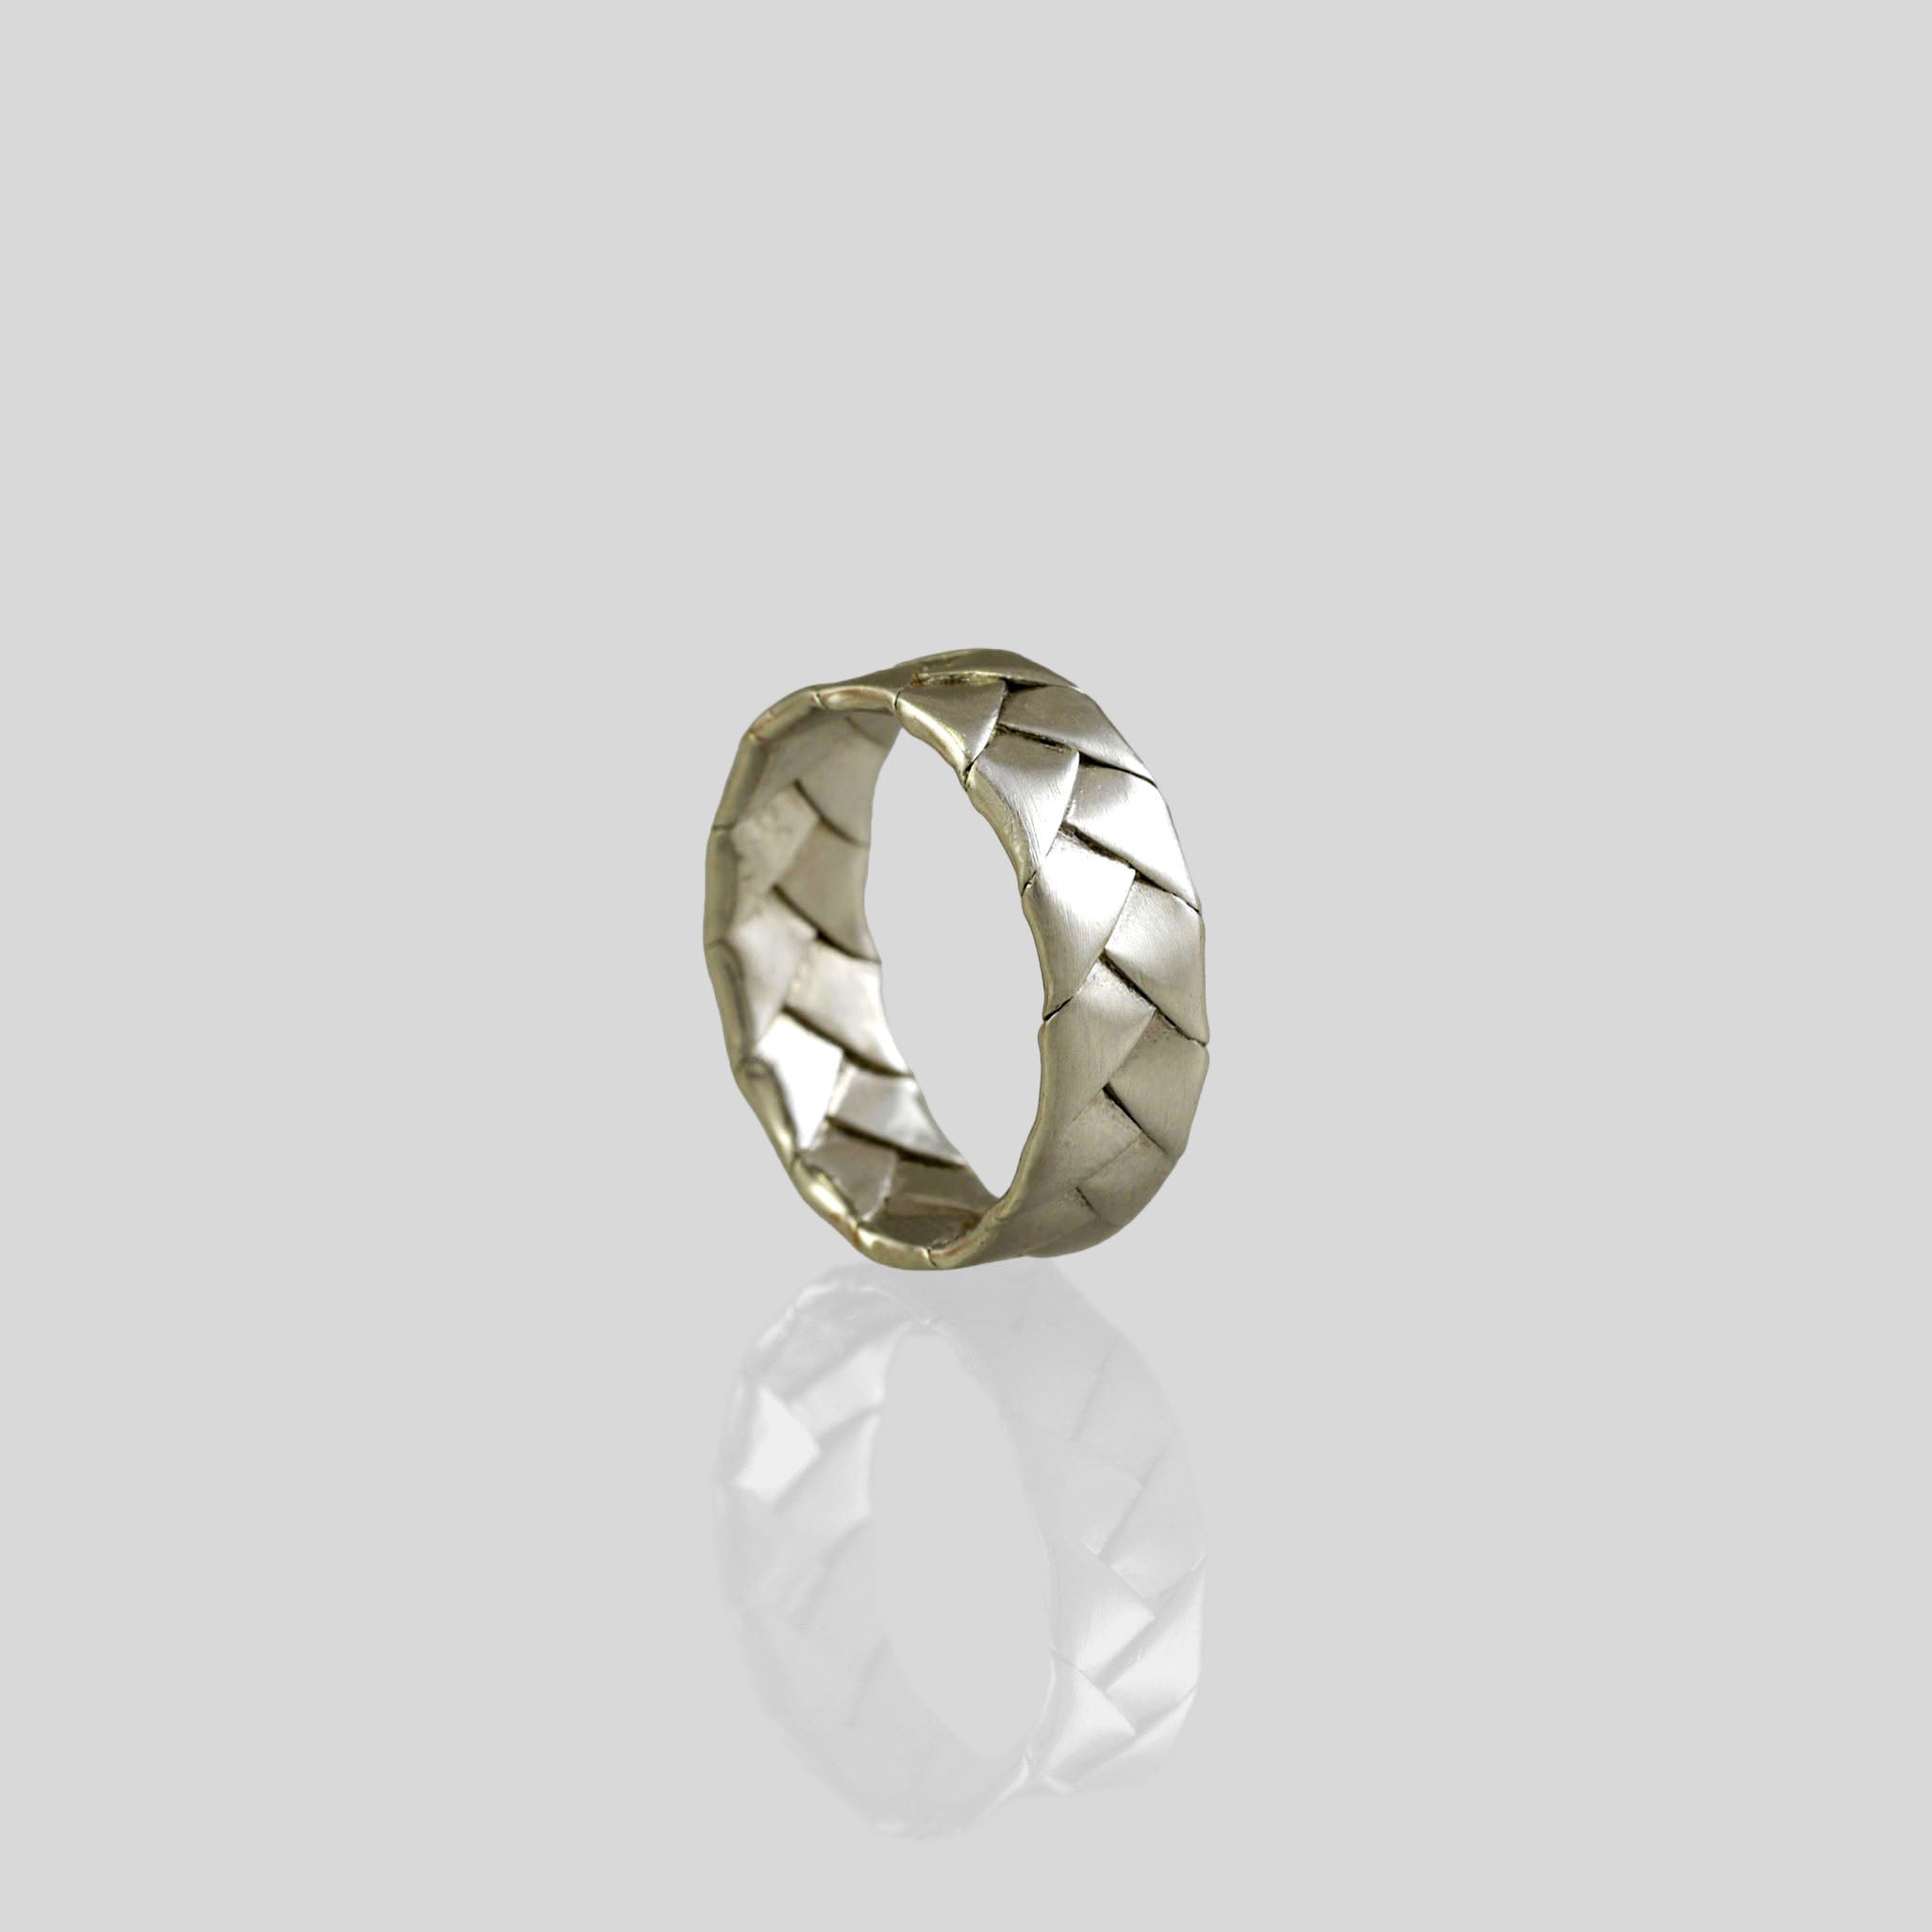 18k White Gold Braid Ring crafted from intertwined gold strands, meticulously modeled using a unique paper processing technique. Clean, precise, and versatile, suitable for daily wear.